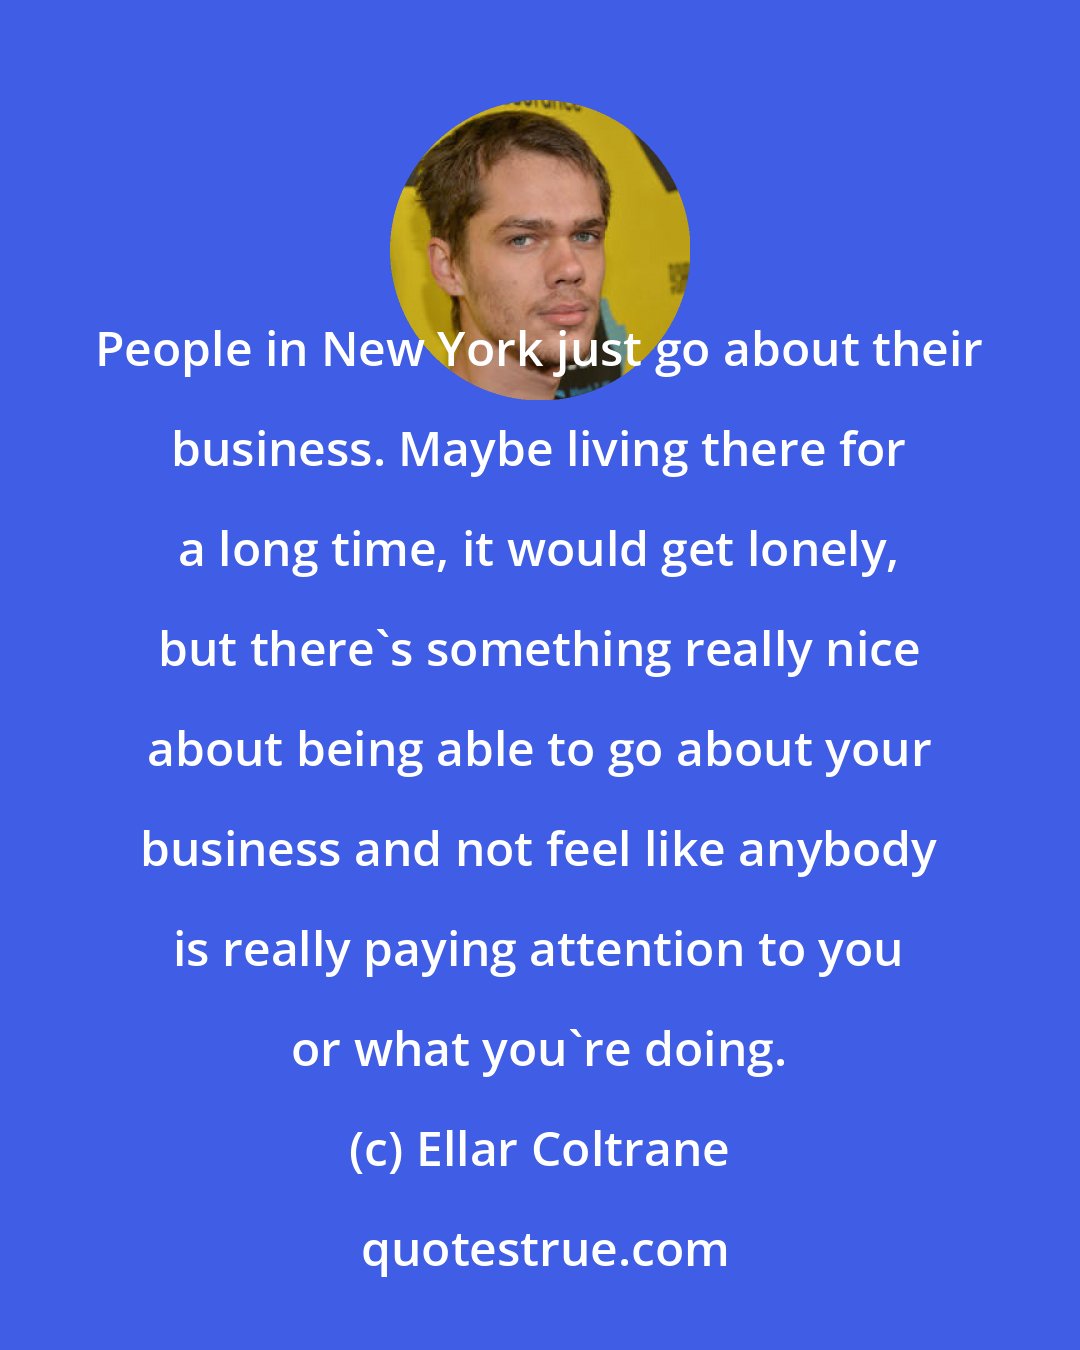 Ellar Coltrane: People in New York just go about their business. Maybe living there for a long time, it would get lonely, but there's something really nice about being able to go about your business and not feel like anybody is really paying attention to you or what you're doing.